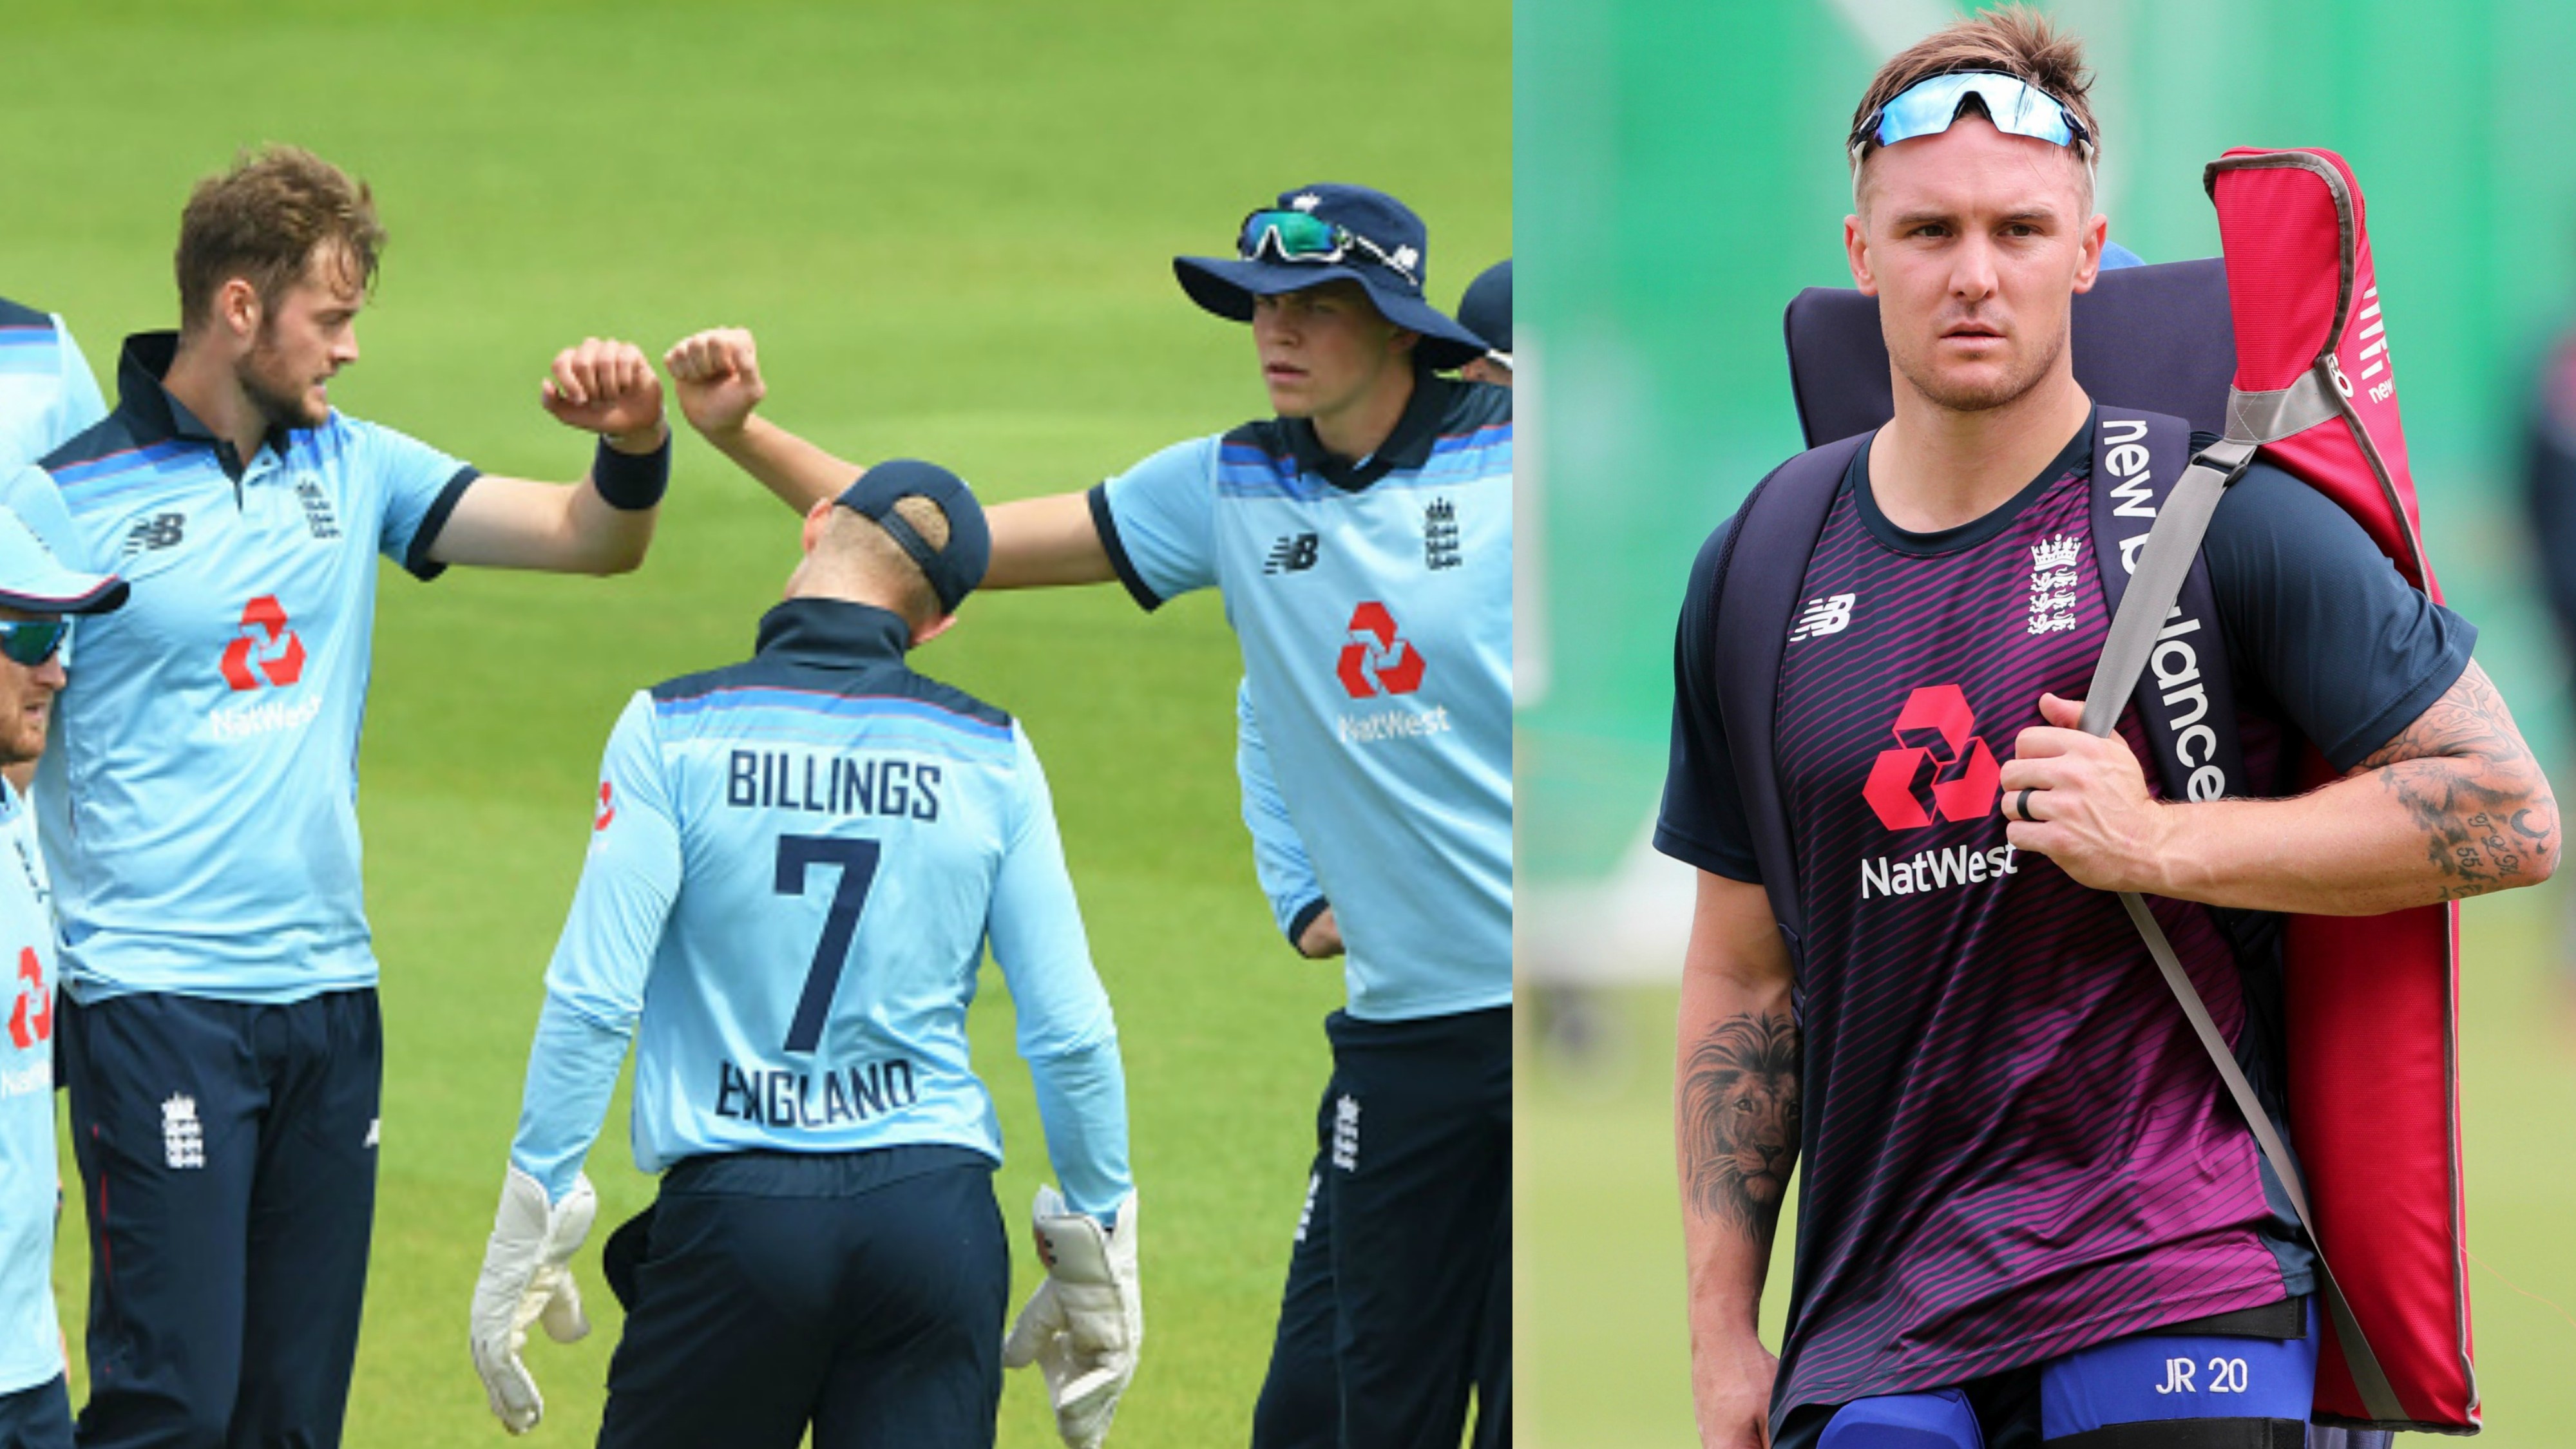 ENG v IRE 2020: Ireland ODI series good chance for England to check fresh talent, says Jason Roy